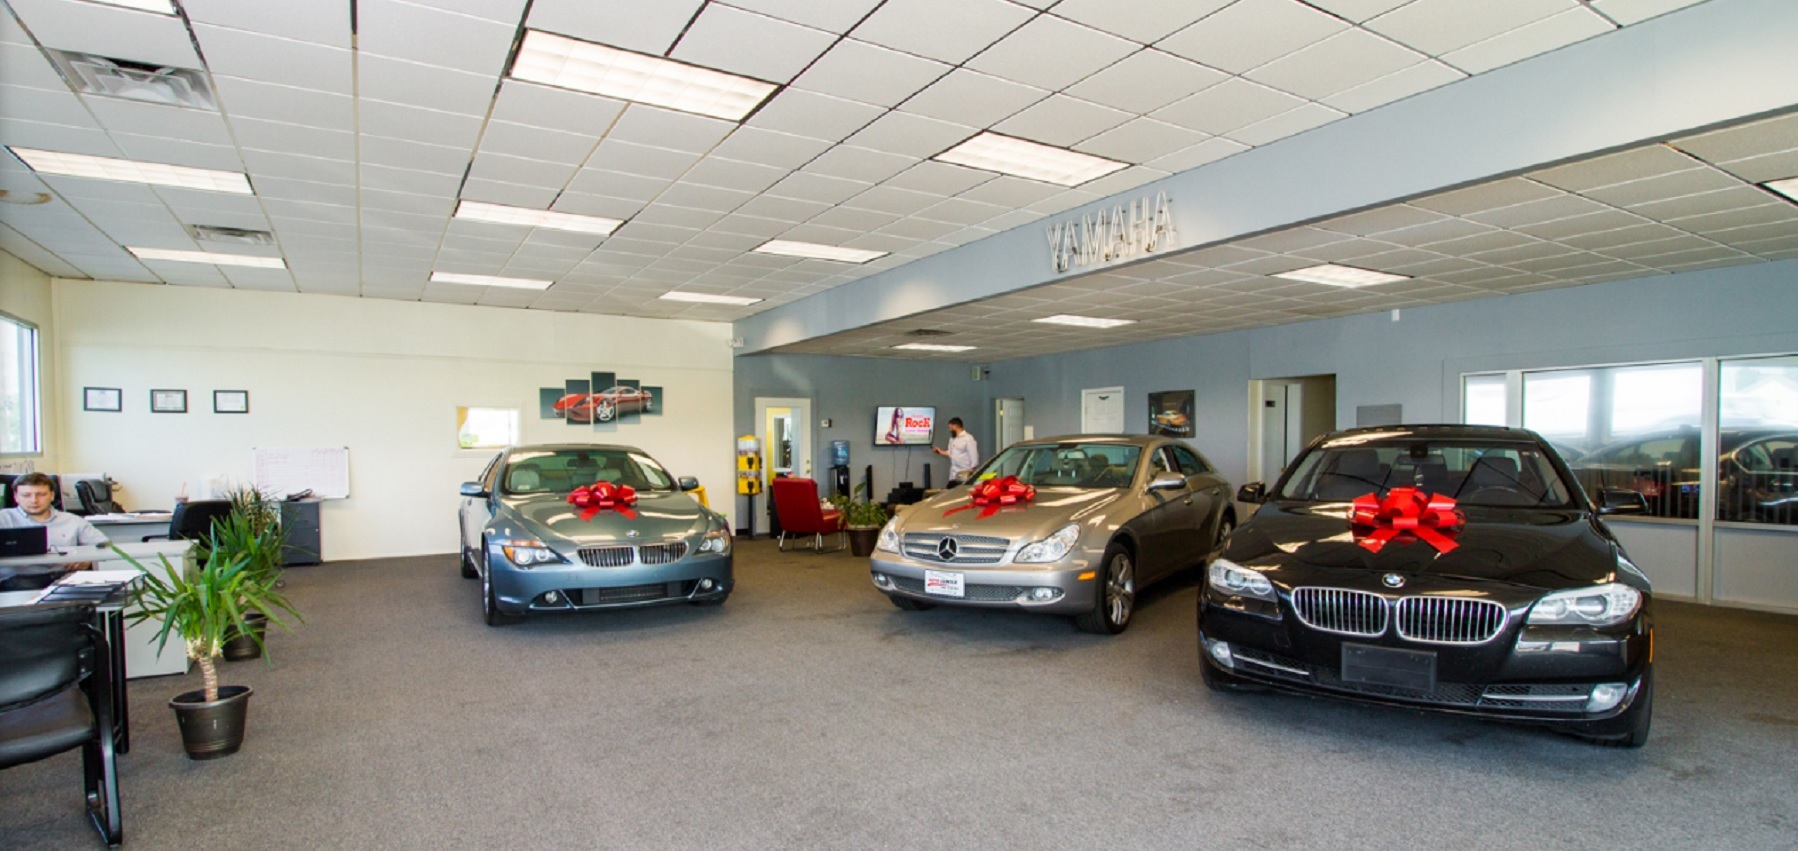 Used Car Dealership in West Bridgewater, MA - Auto Center Sales & Service